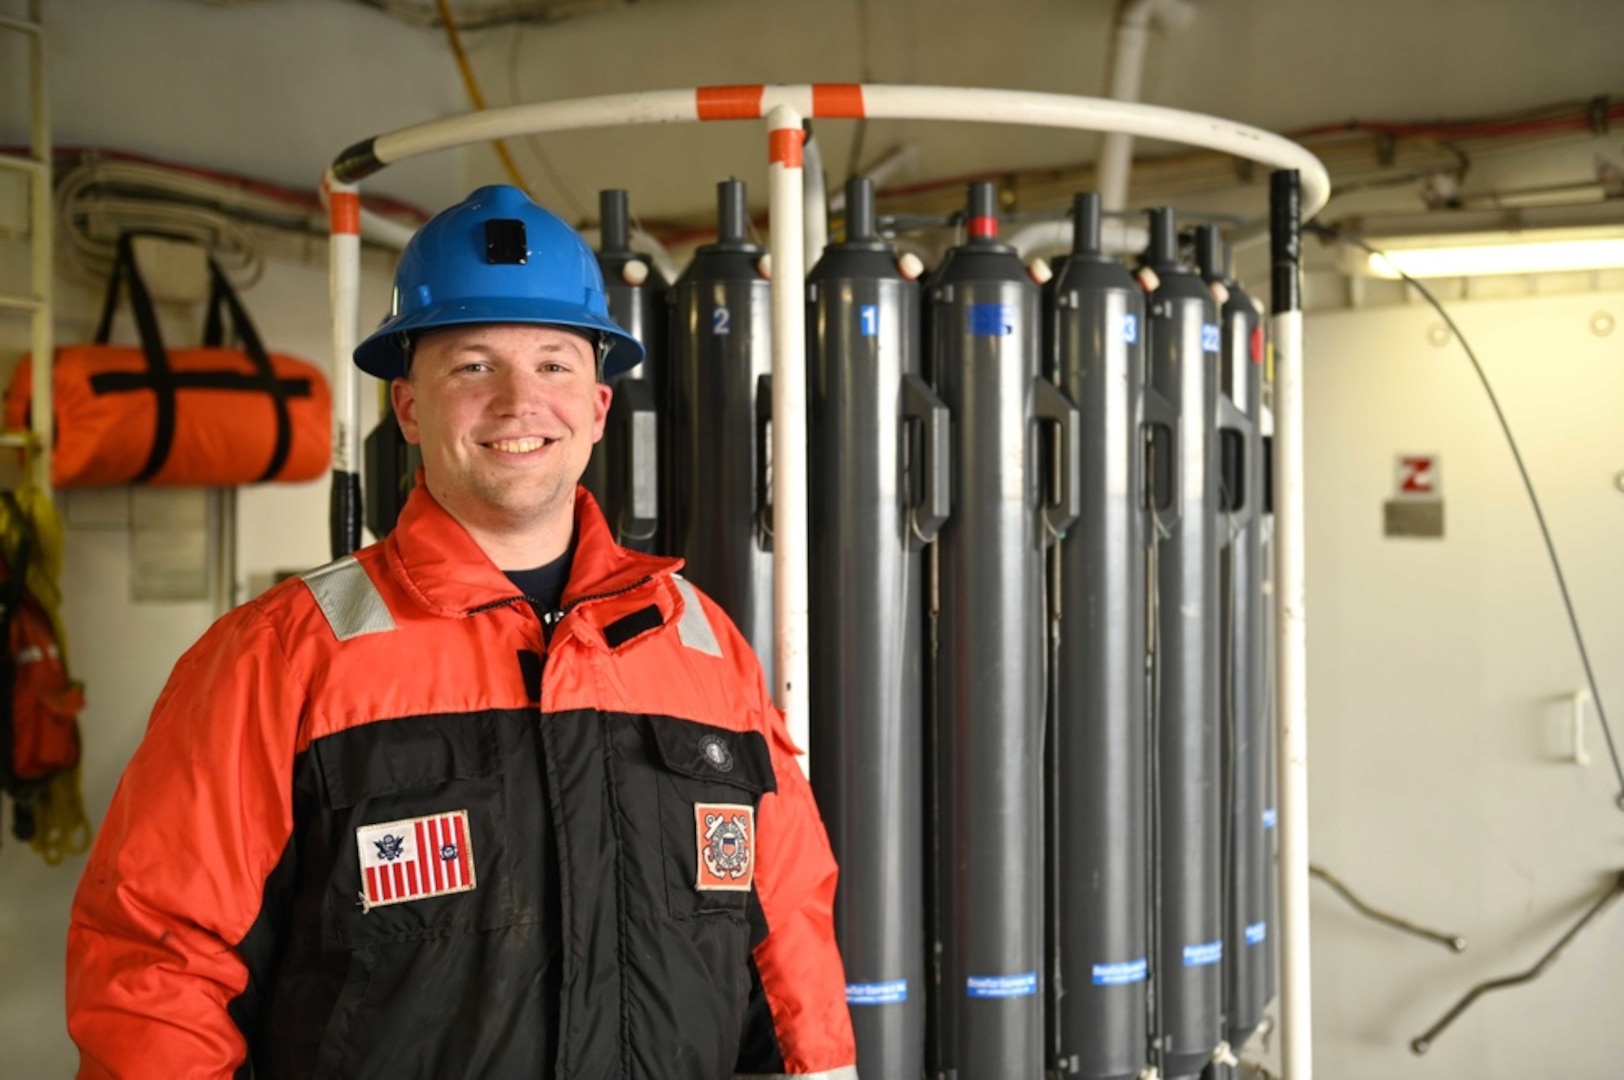 Coast Guard servicemember smiling next to scientific instruments on board Cutter Healy